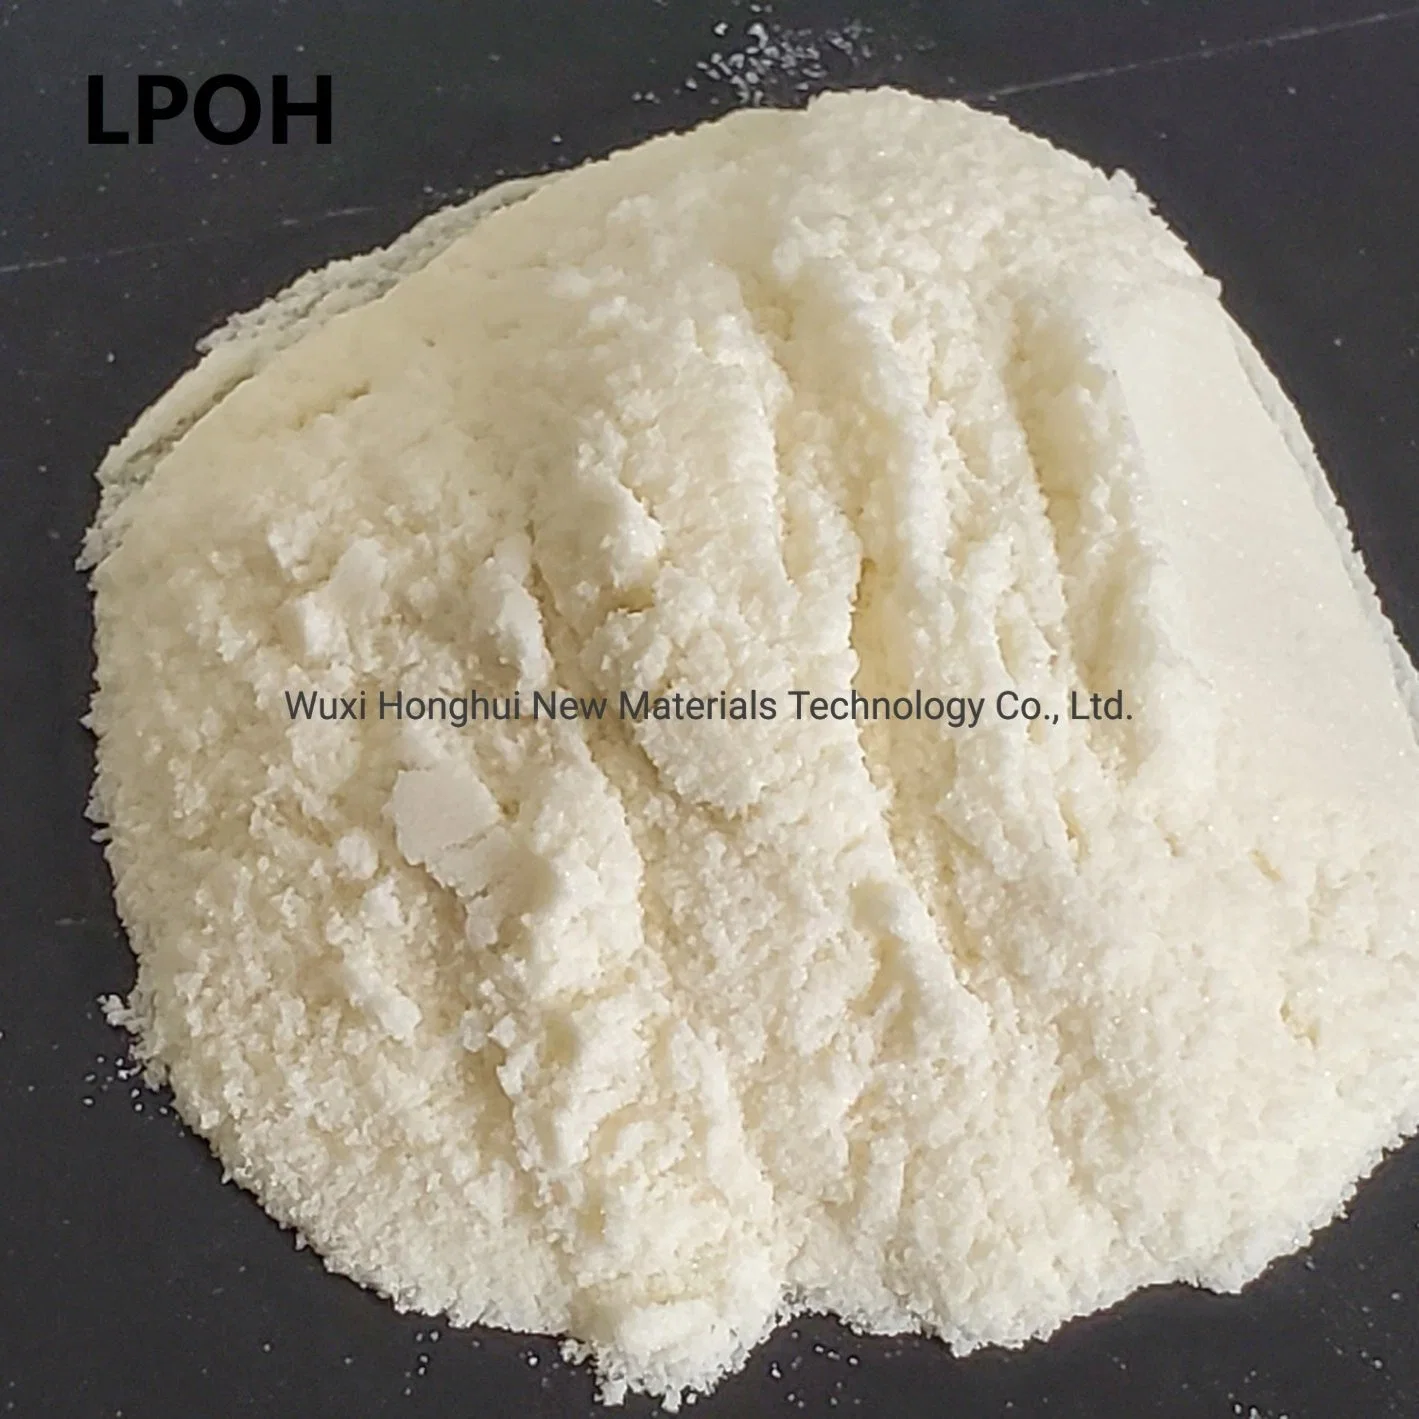 Vinyl Copolymer Resin Lpoh Equal to Dow Vagd for Ink /Paint /Coating